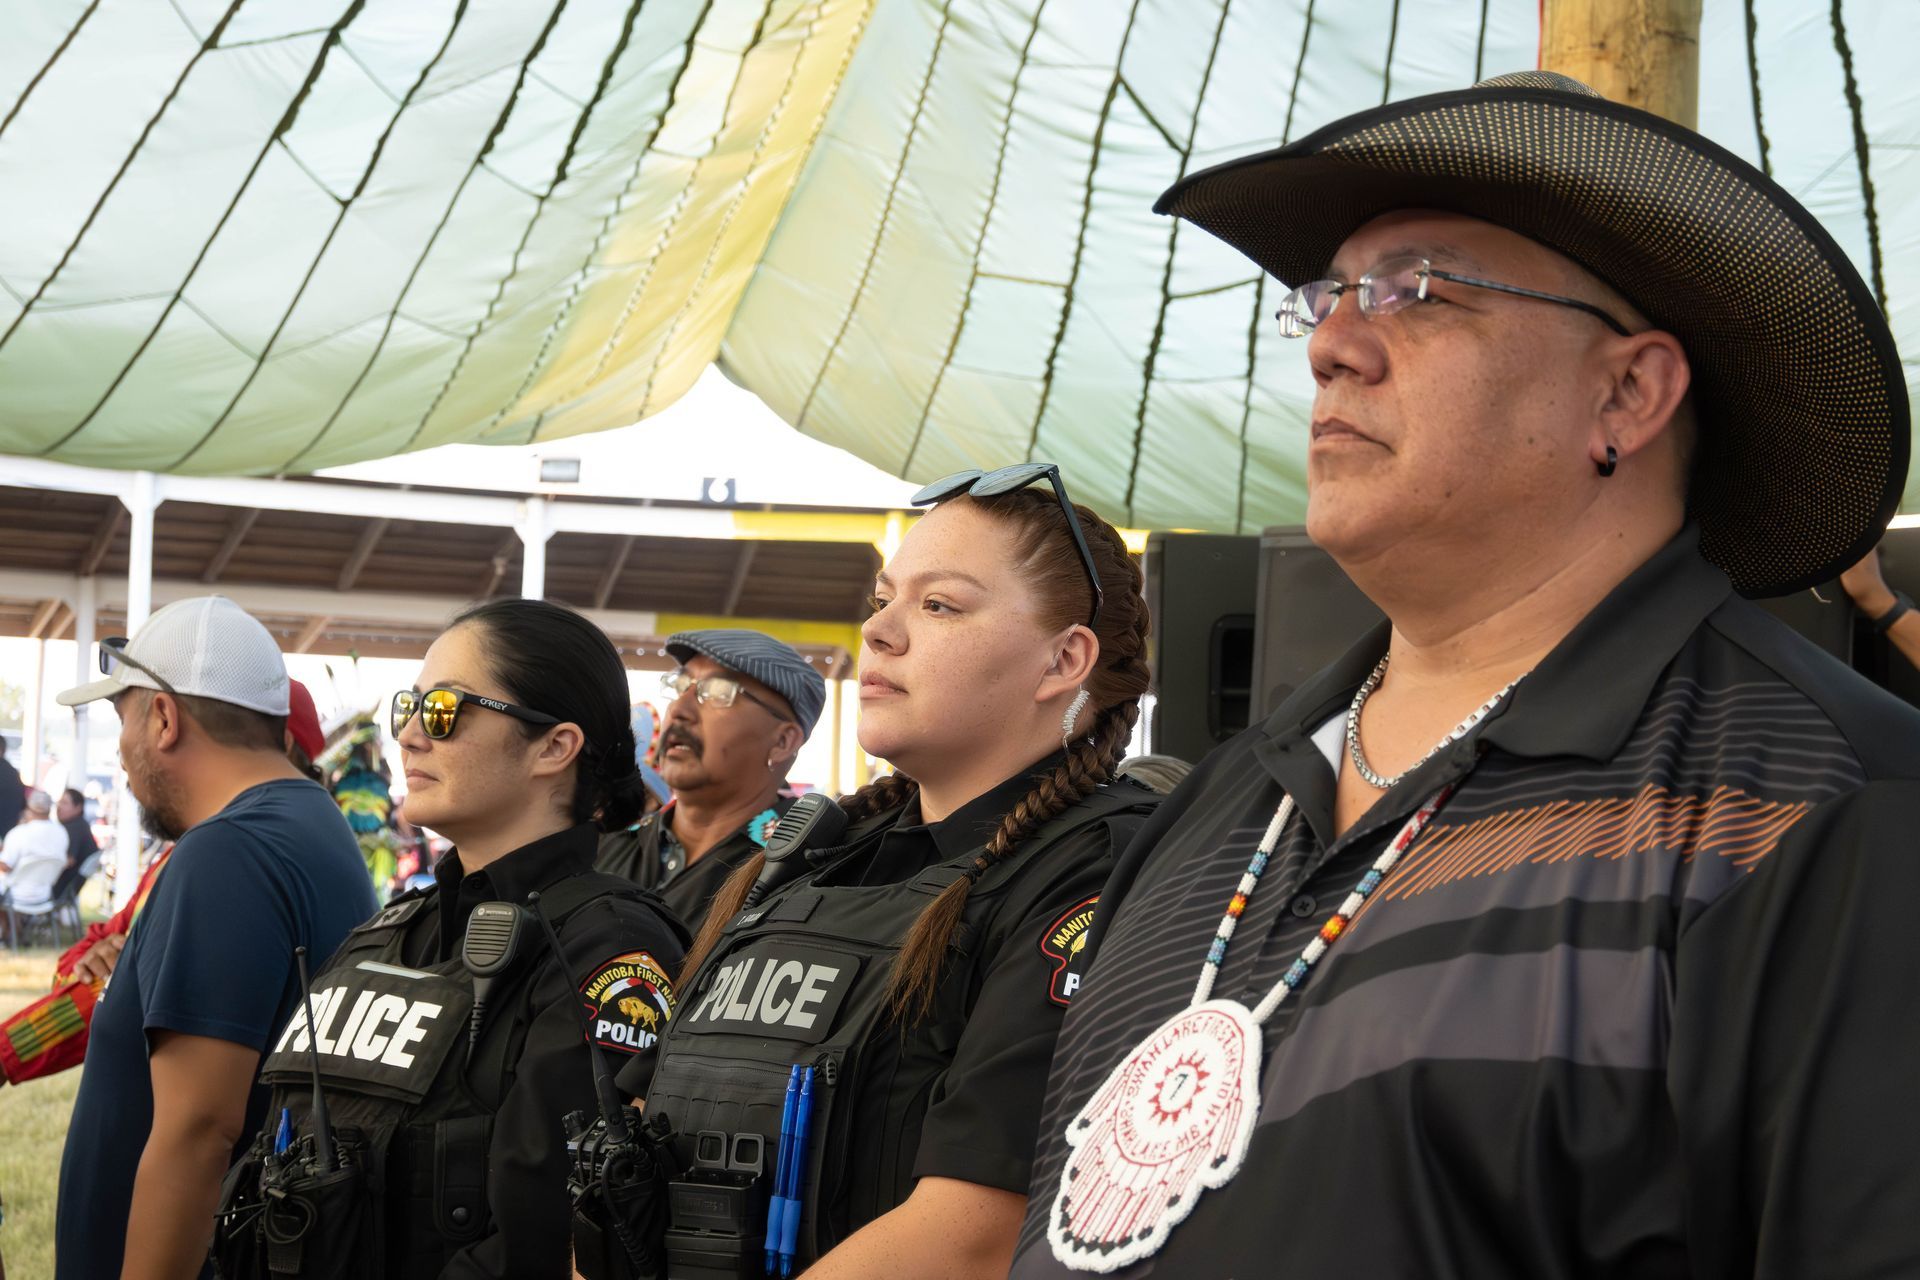 MFNPS-Manitoba First Nations Police Service - First nations community event with officer